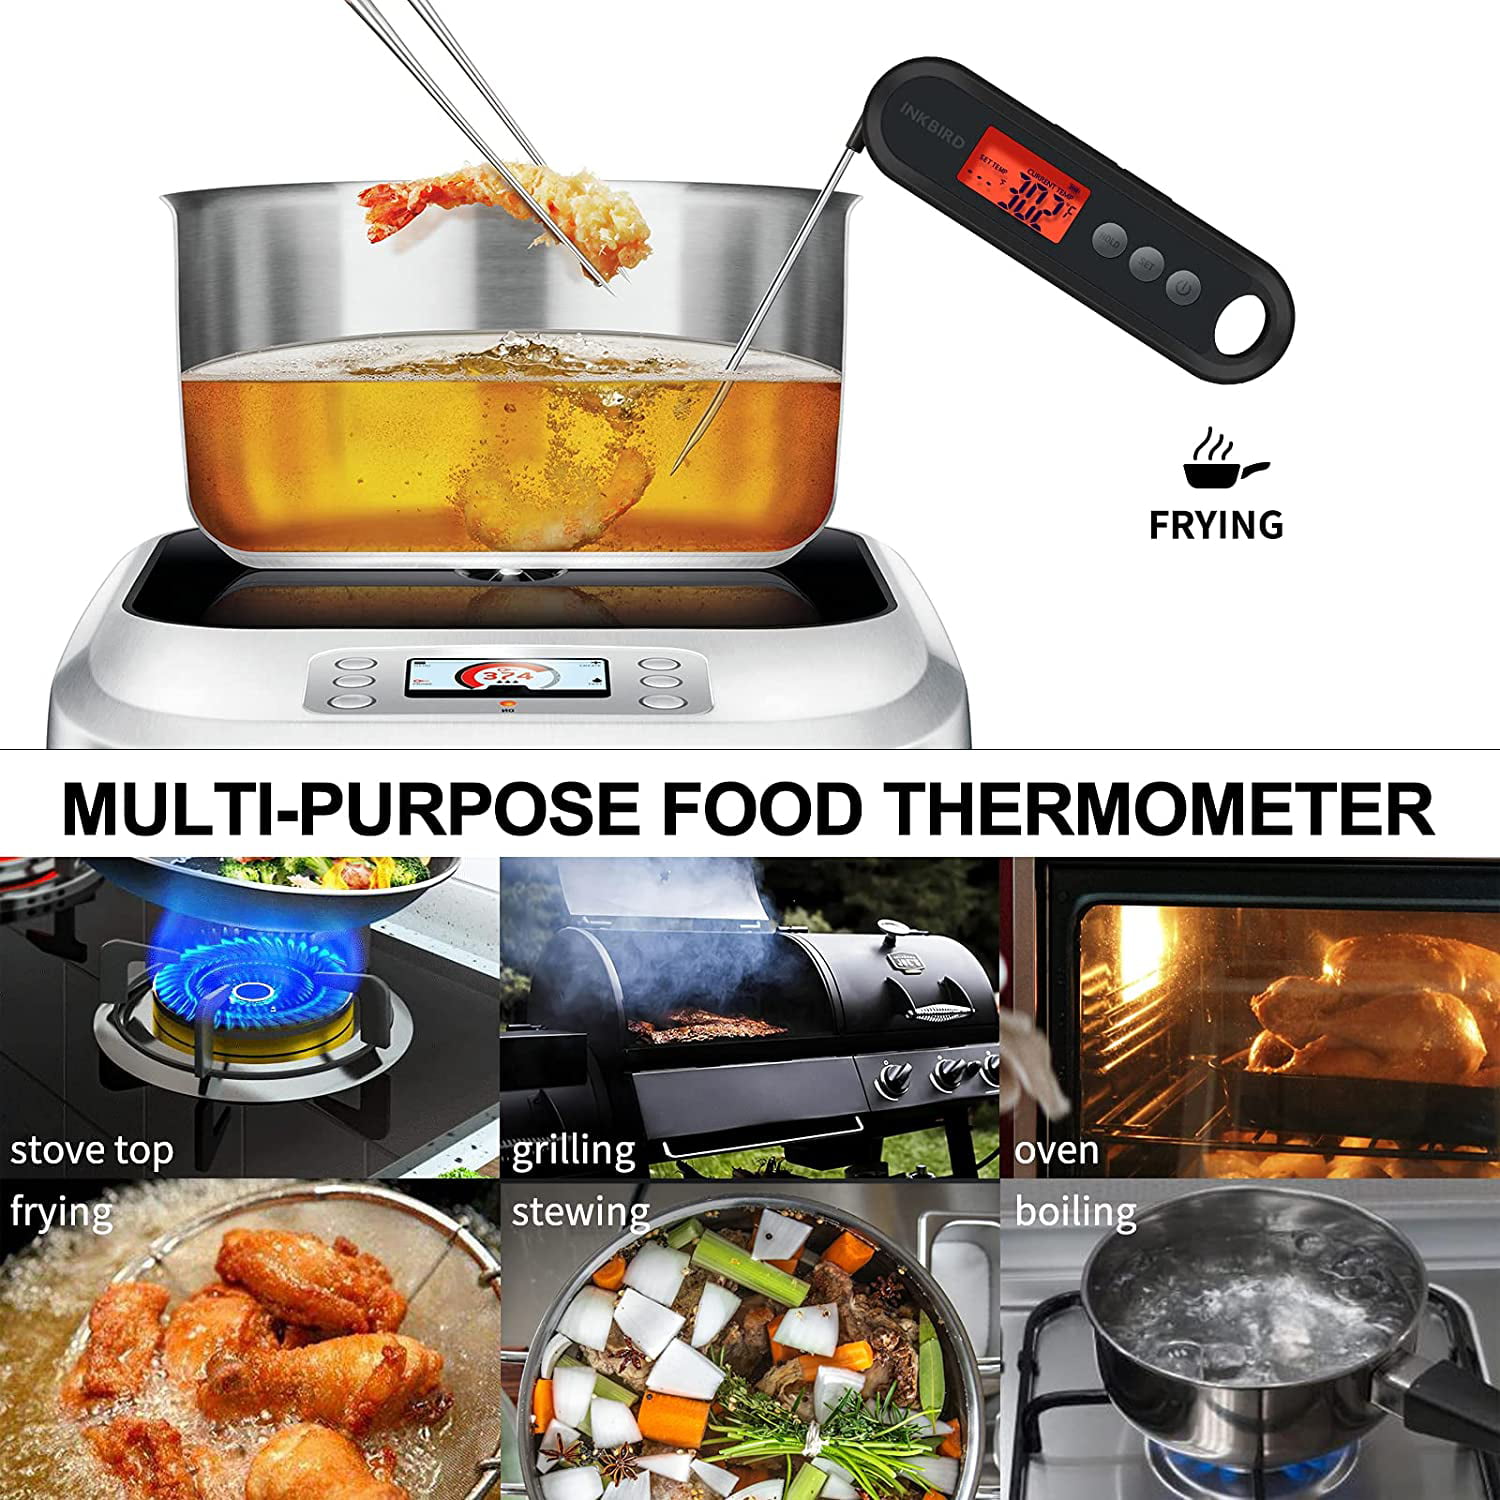 INKBIRD Instant Read Meat Thermometer, IHT-2XP, Rechargeable Digital Food  Thermometer, with Calibration, Magnet, Backlight (With One External Probe)  